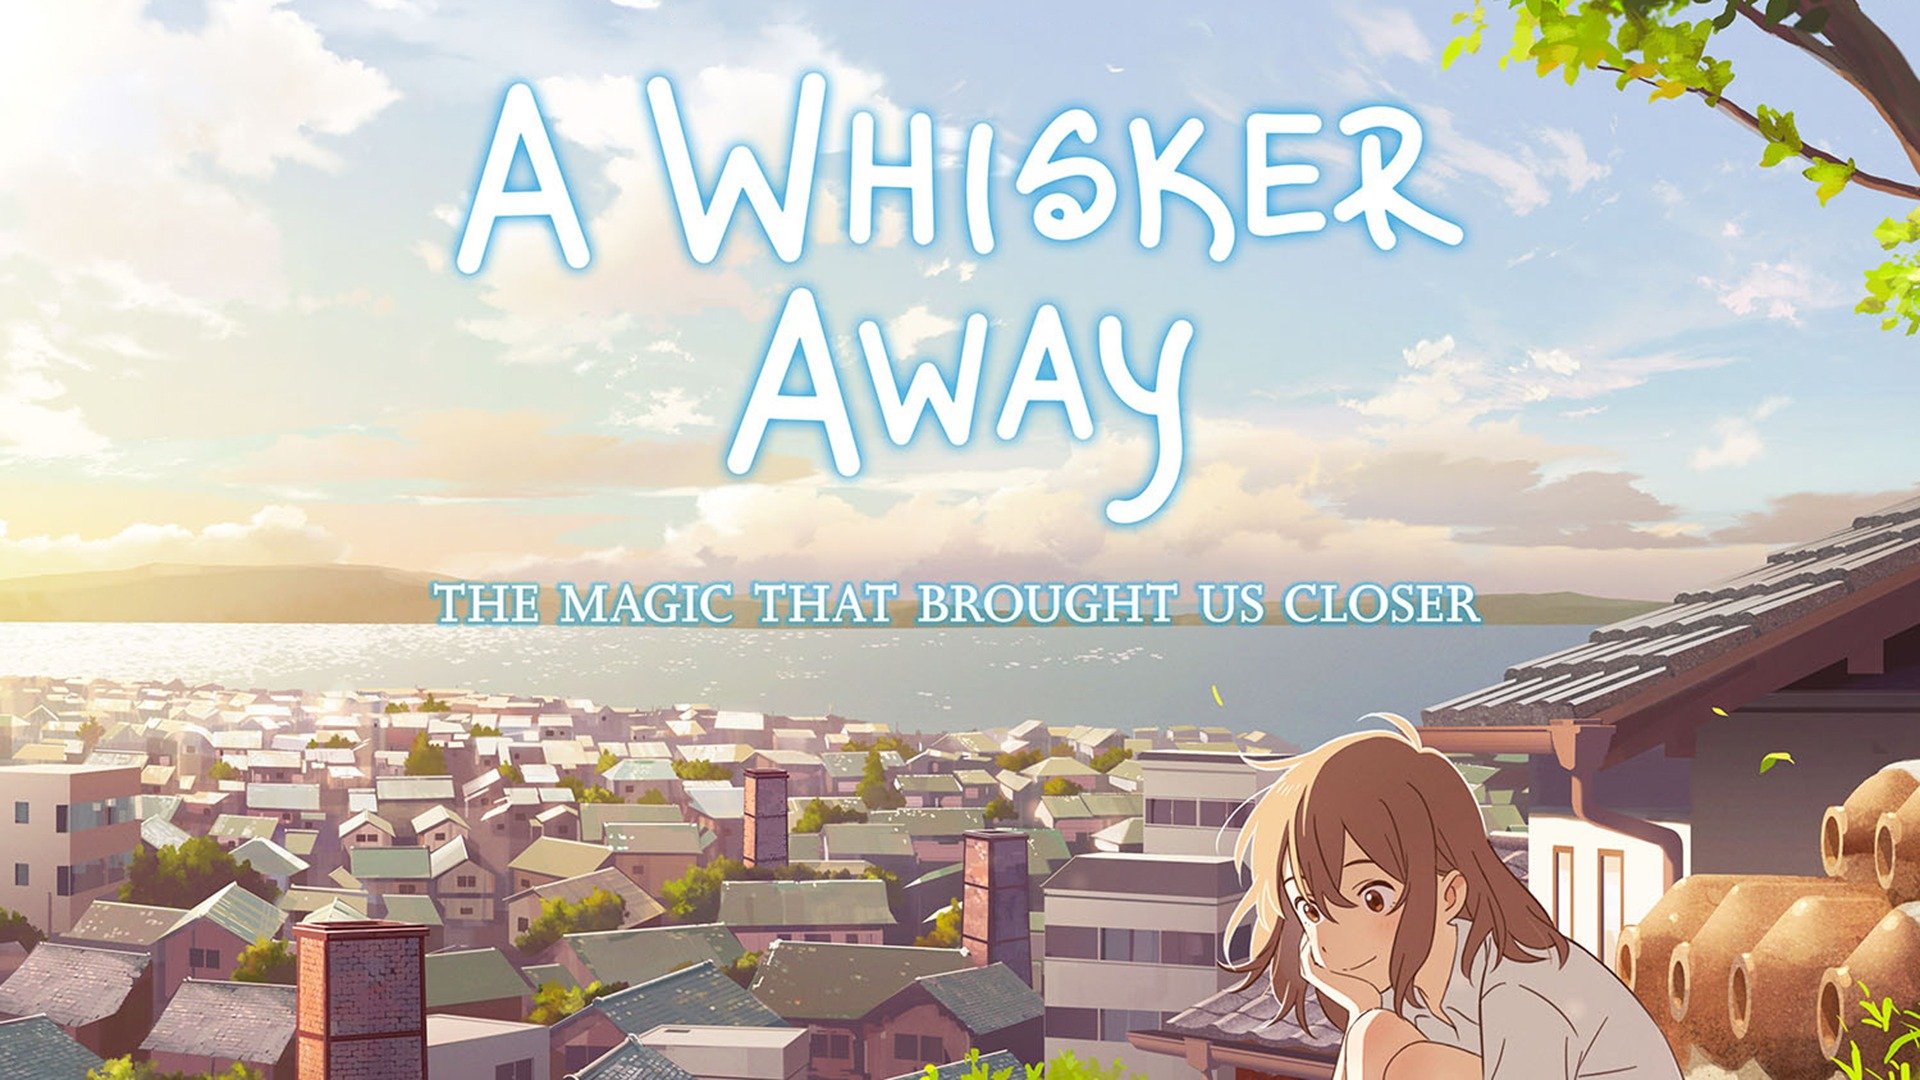 A Whisker Away Audience Reviews | Flixster